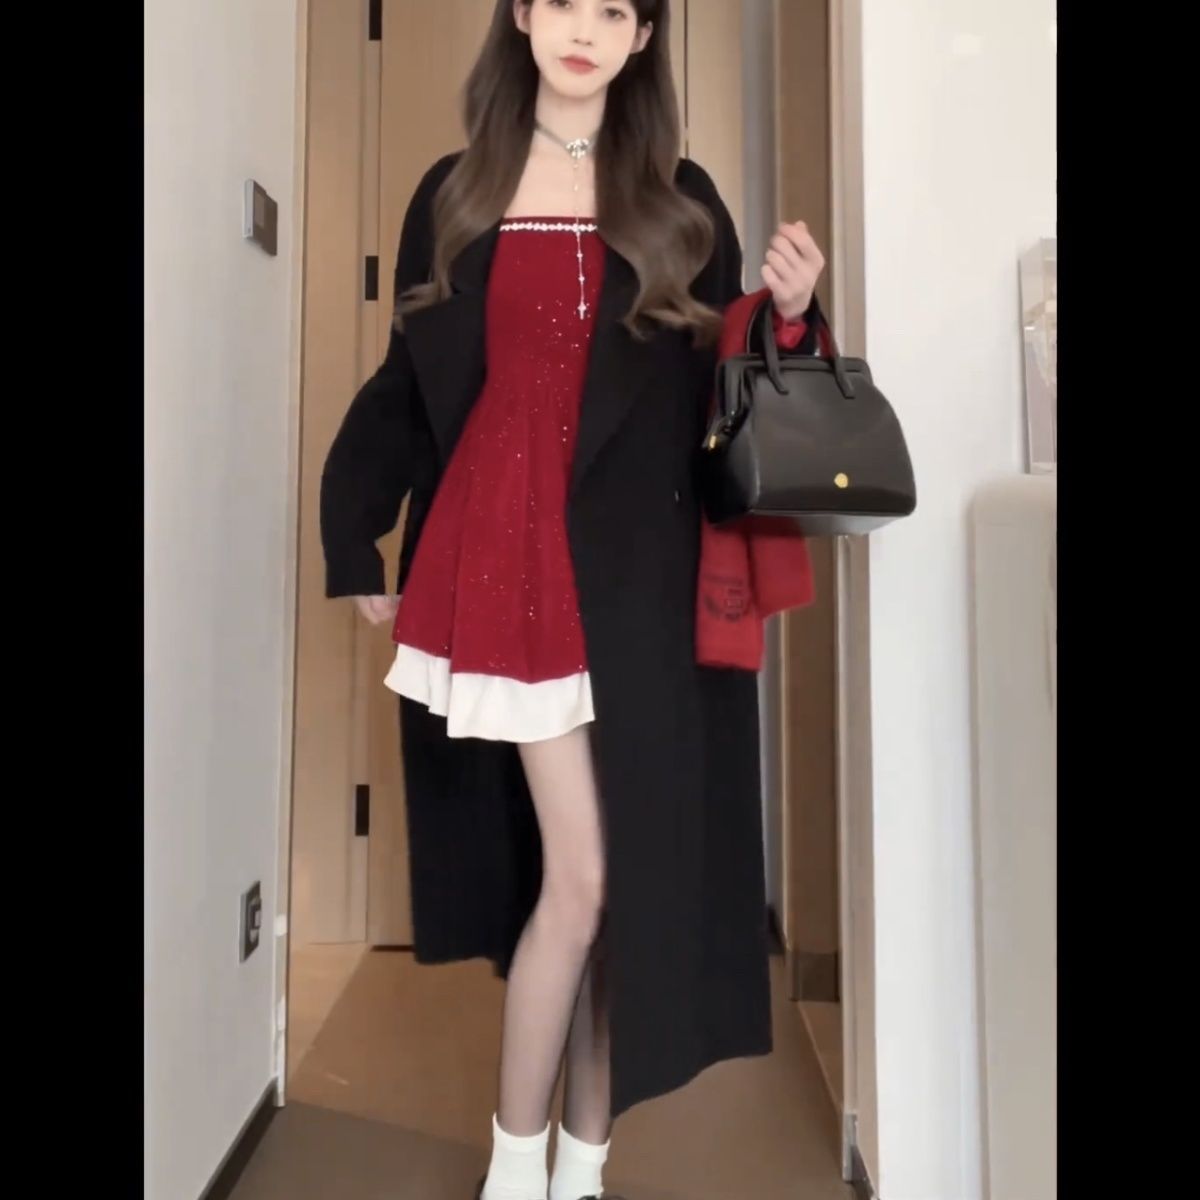 Matsumoto mourning cloth Christmas dress square collar double layer dress autumn and winter slimming waist new sequined atmosphere dress